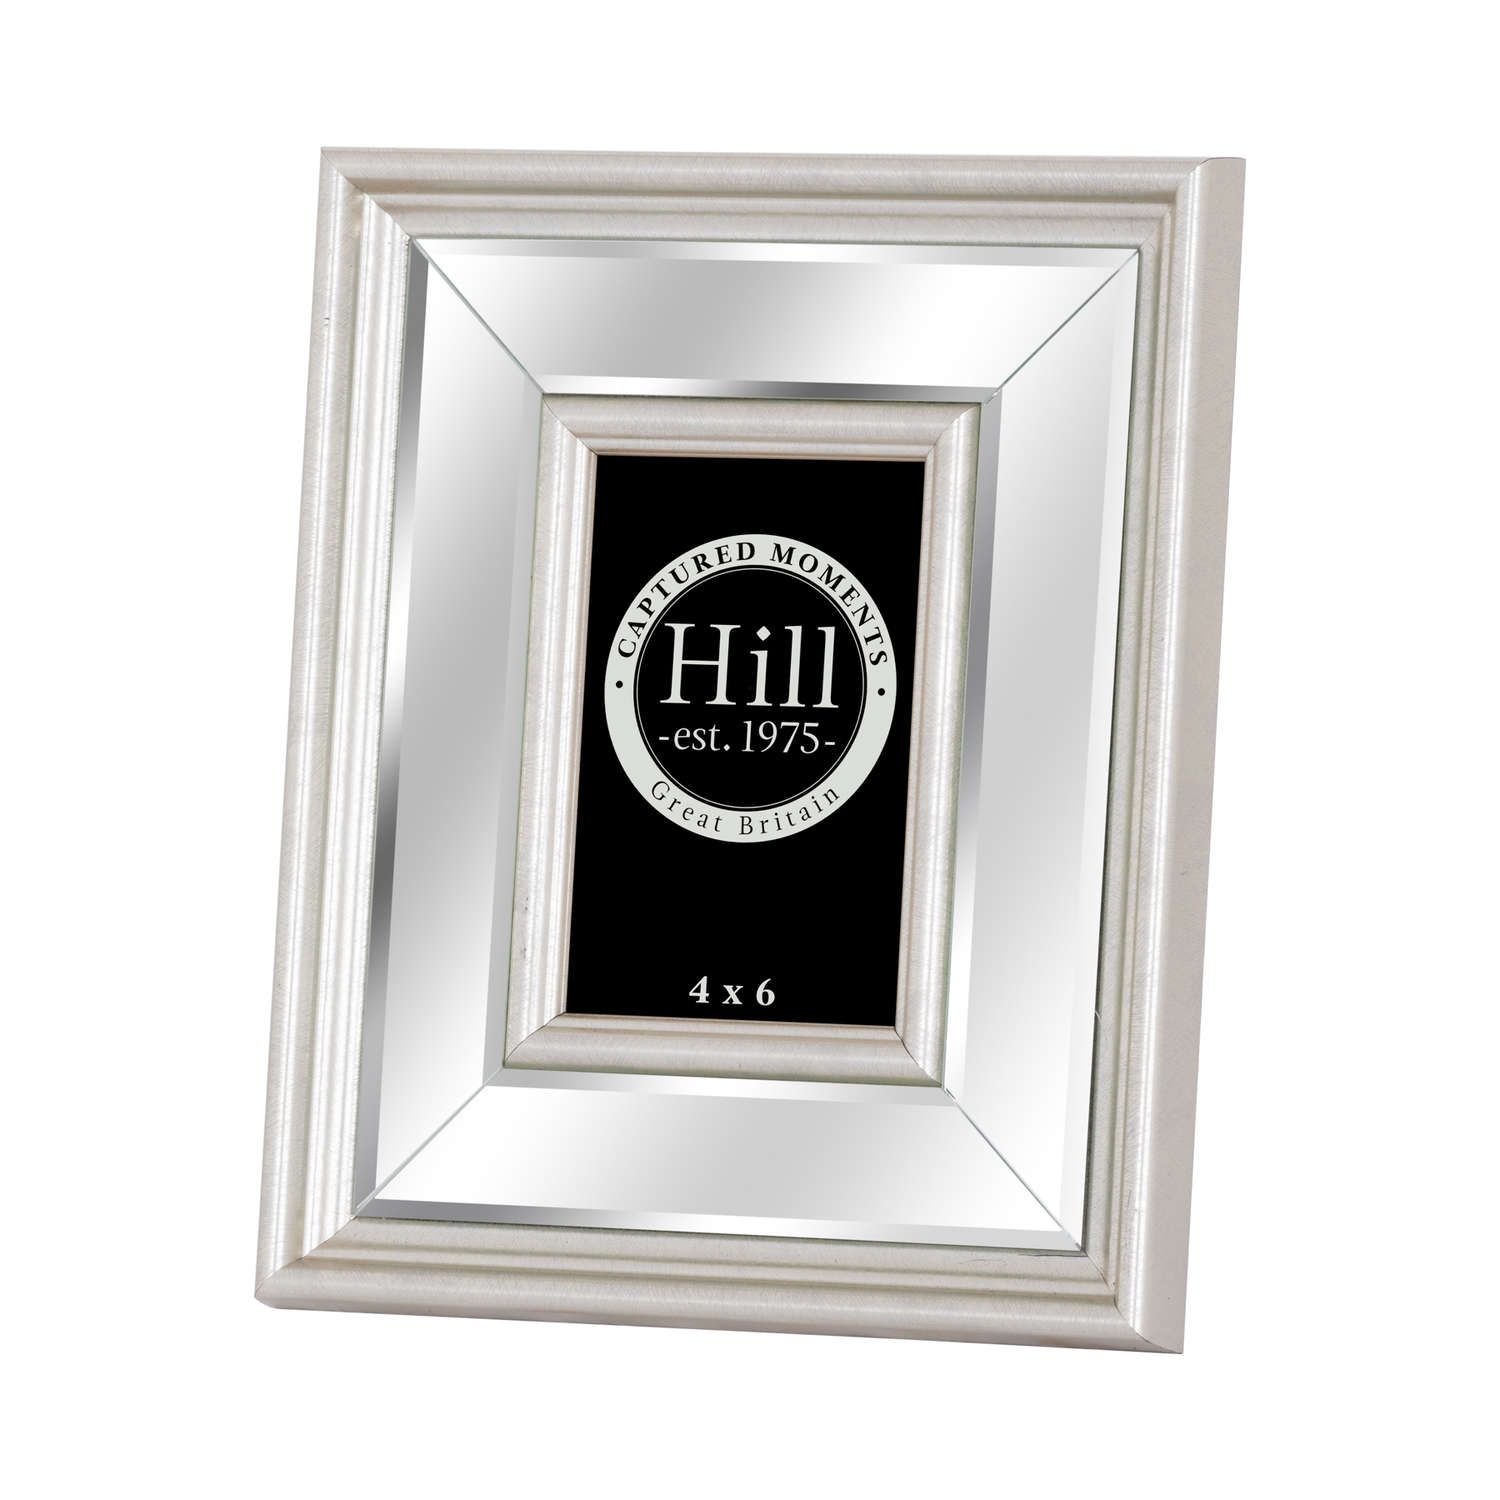 Silver Bevelled Mirrored Photo Frame 4X6 - Image 1